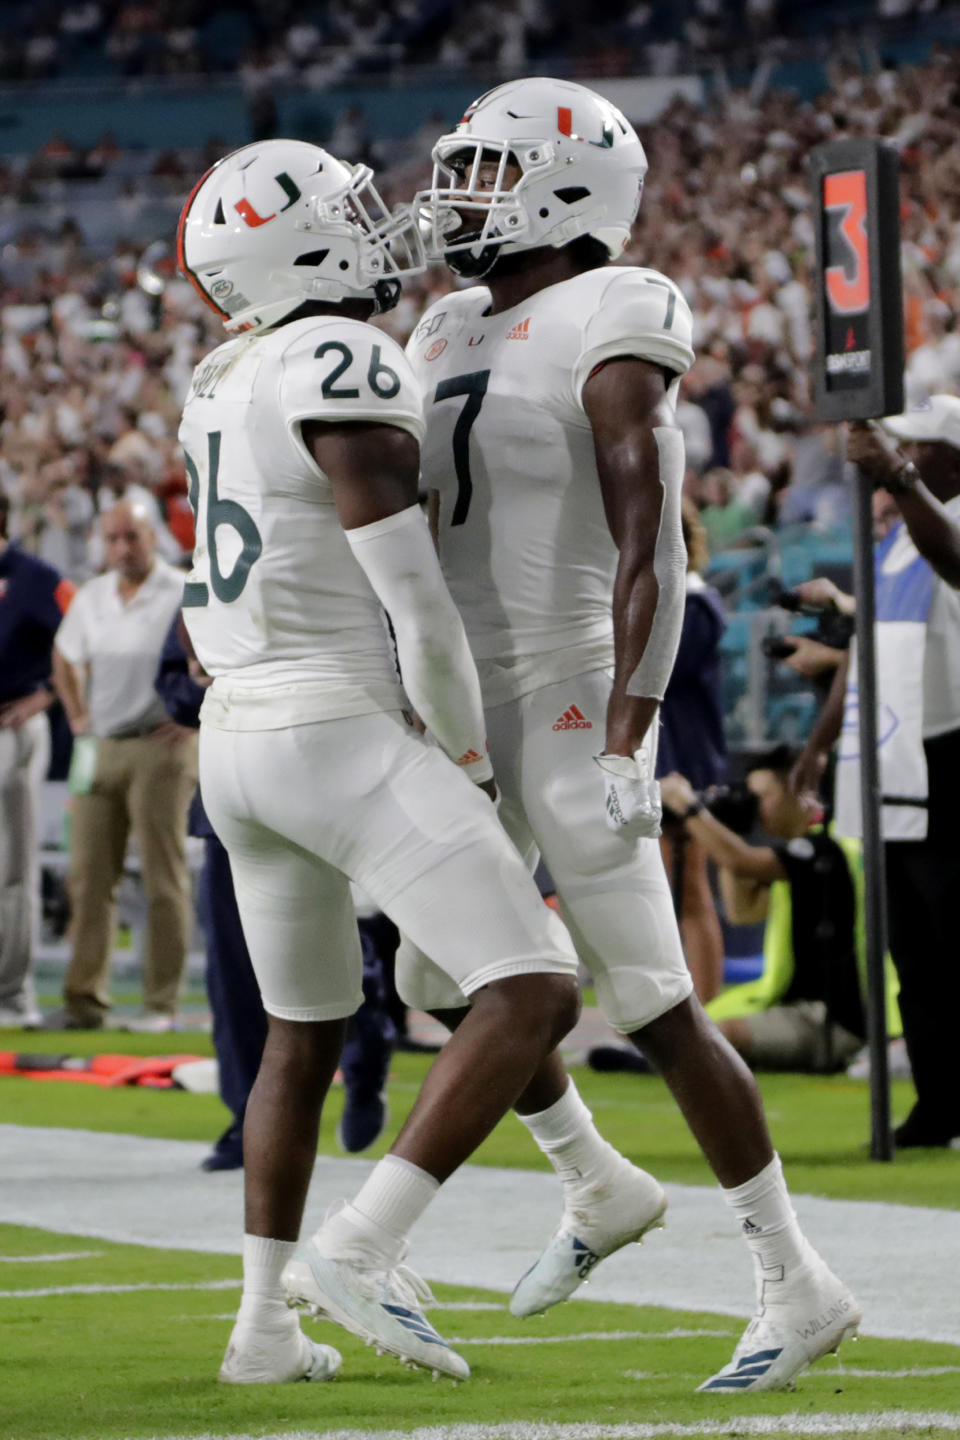 Miami cornerback Al Blades Jr. (7) celebrates with defensive back Gurvan Hall Jr. (26) after breaking up a pass intended for Virginia wide receiver Terrell Chatman during the first half of an NCAA college football game, Friday, Oct. 11, 2019, in Miami Gardens, Fla. (AP Photo/Lynne Sladky)